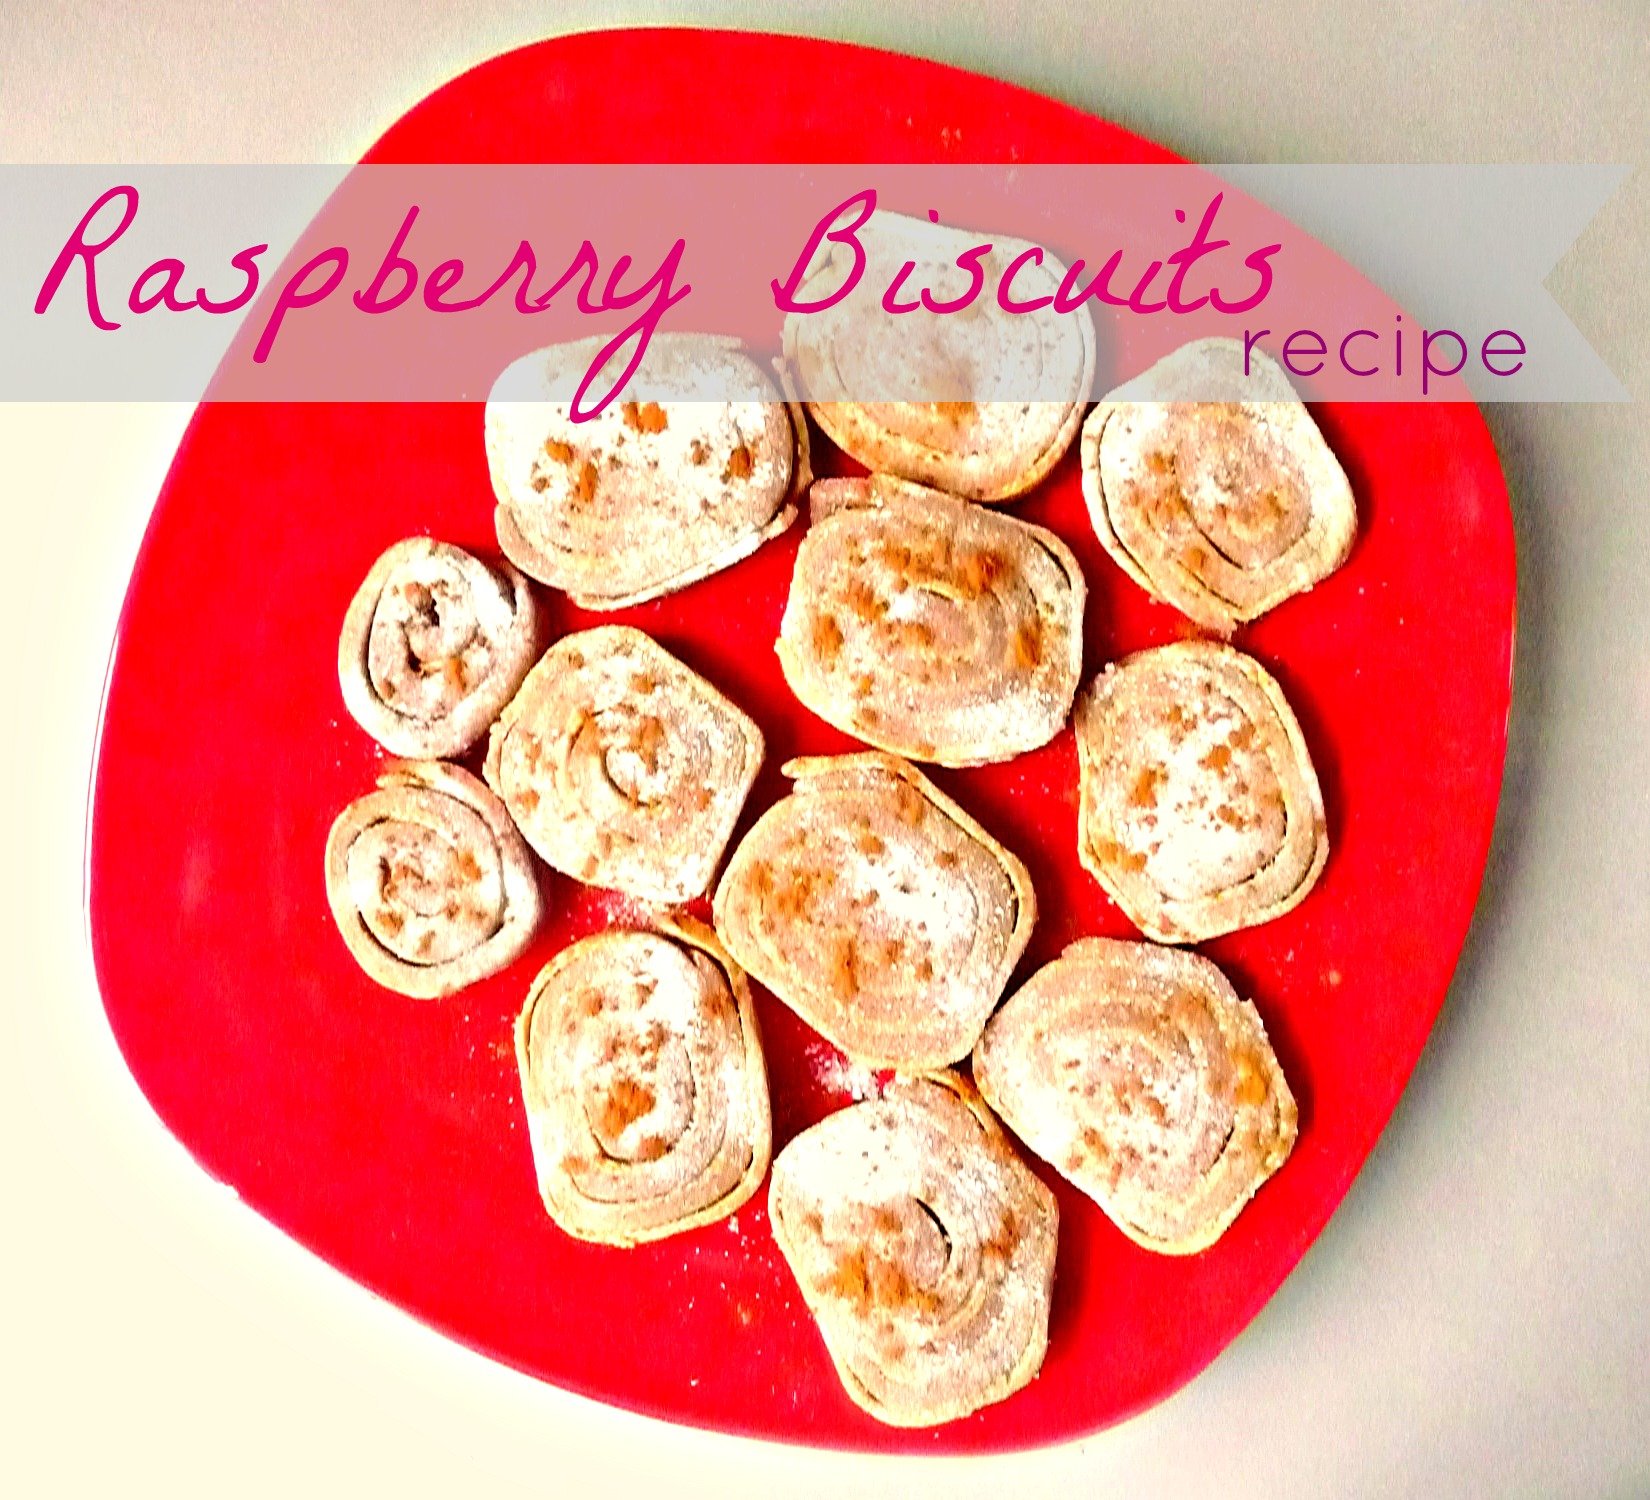 Raspberry and butter biscuits recipe